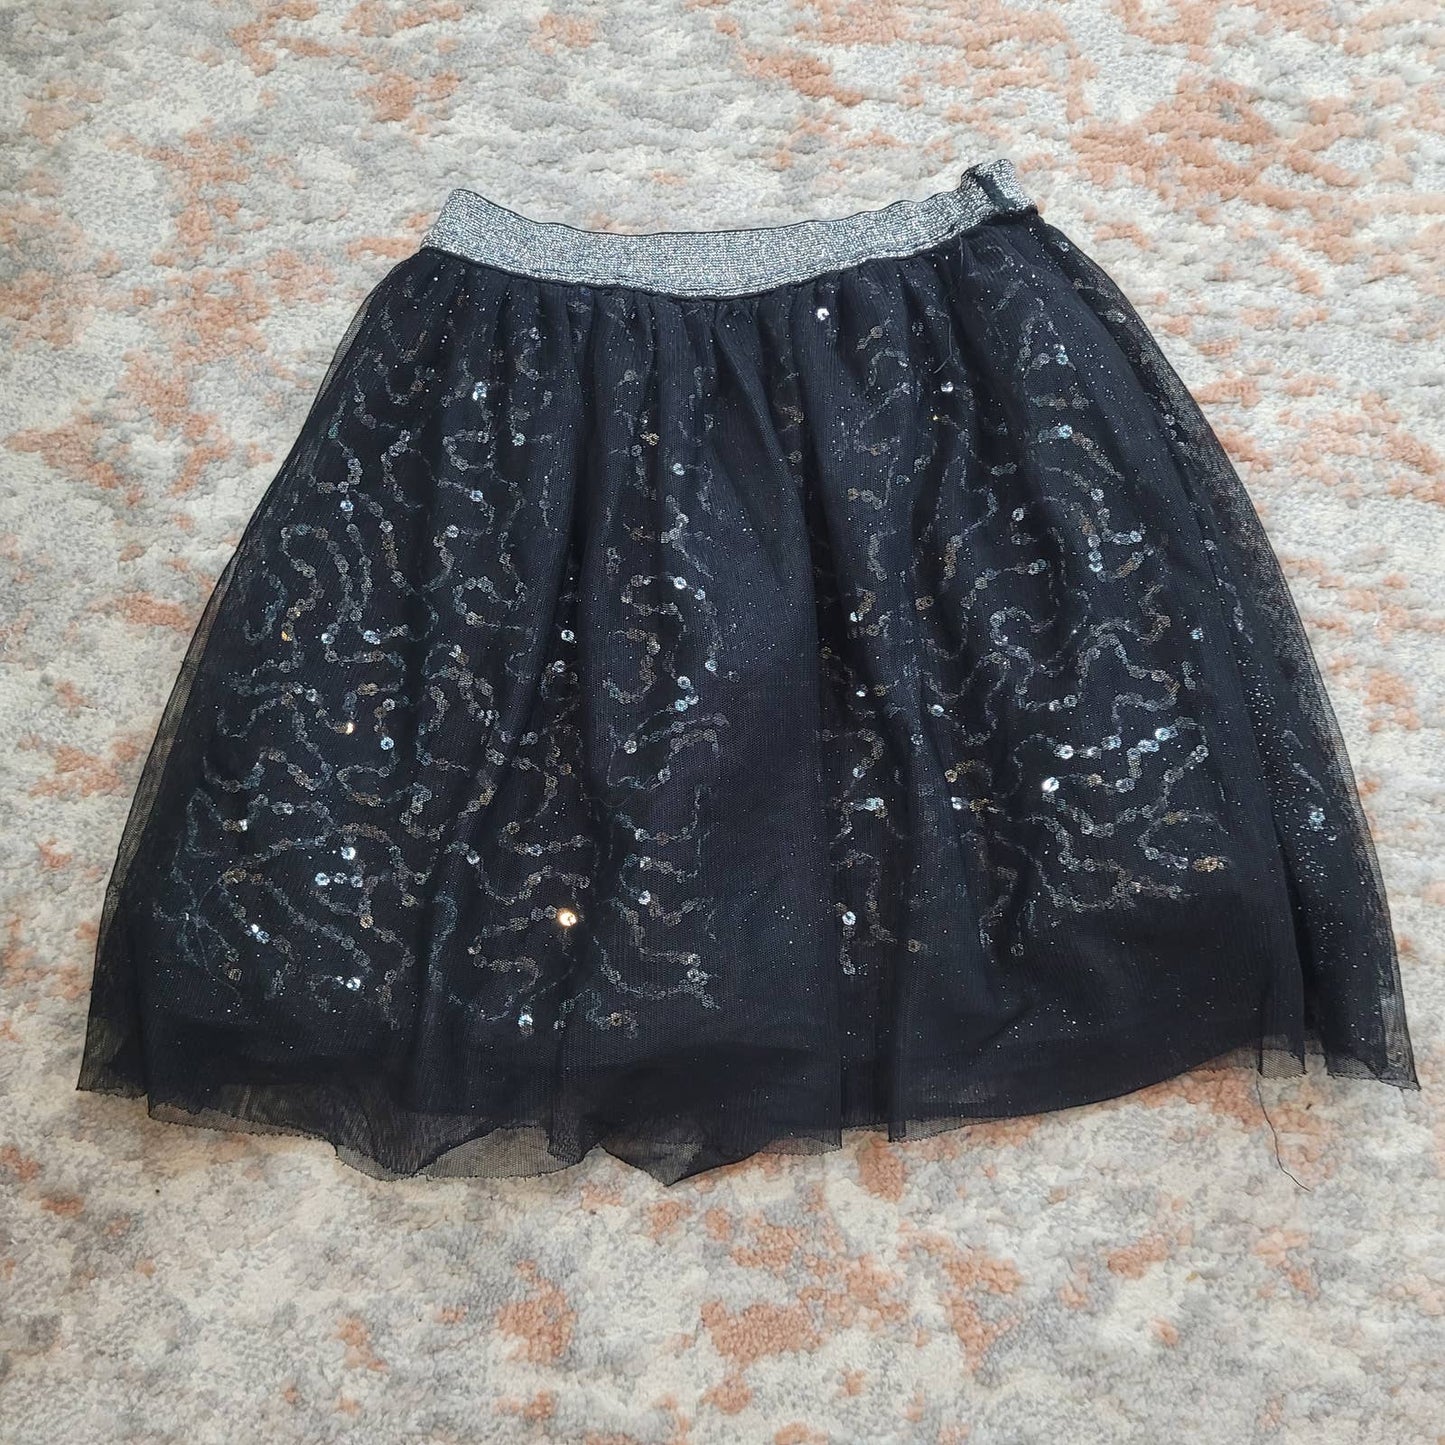 George Sequin Black Skirt with Tulle Overlay - Size 7/8Y